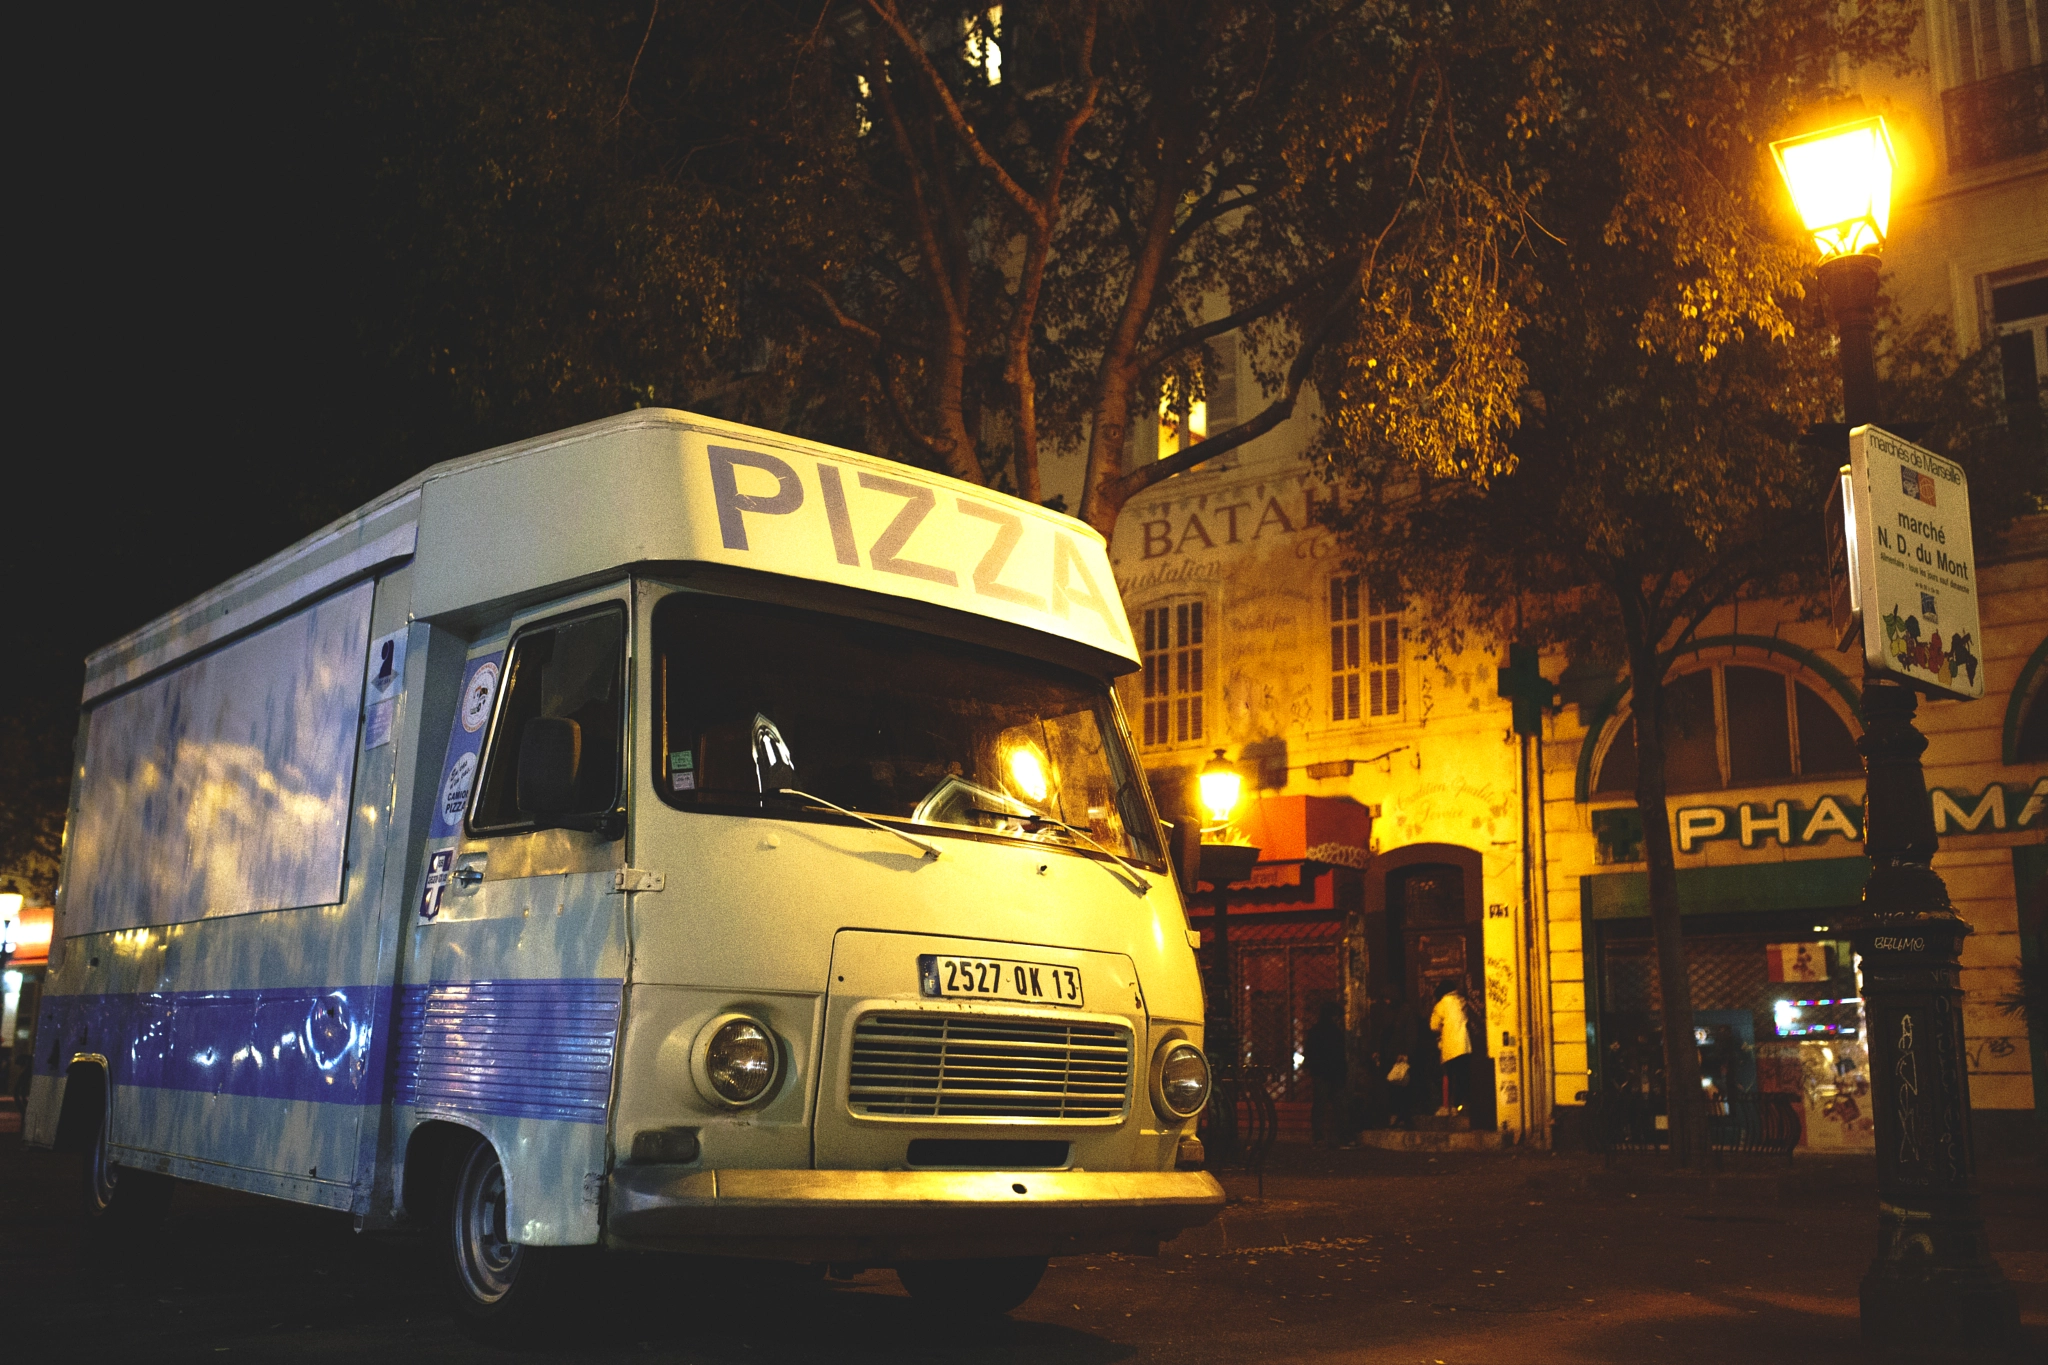 Sony a99 II sample photo. Pizza truck photography